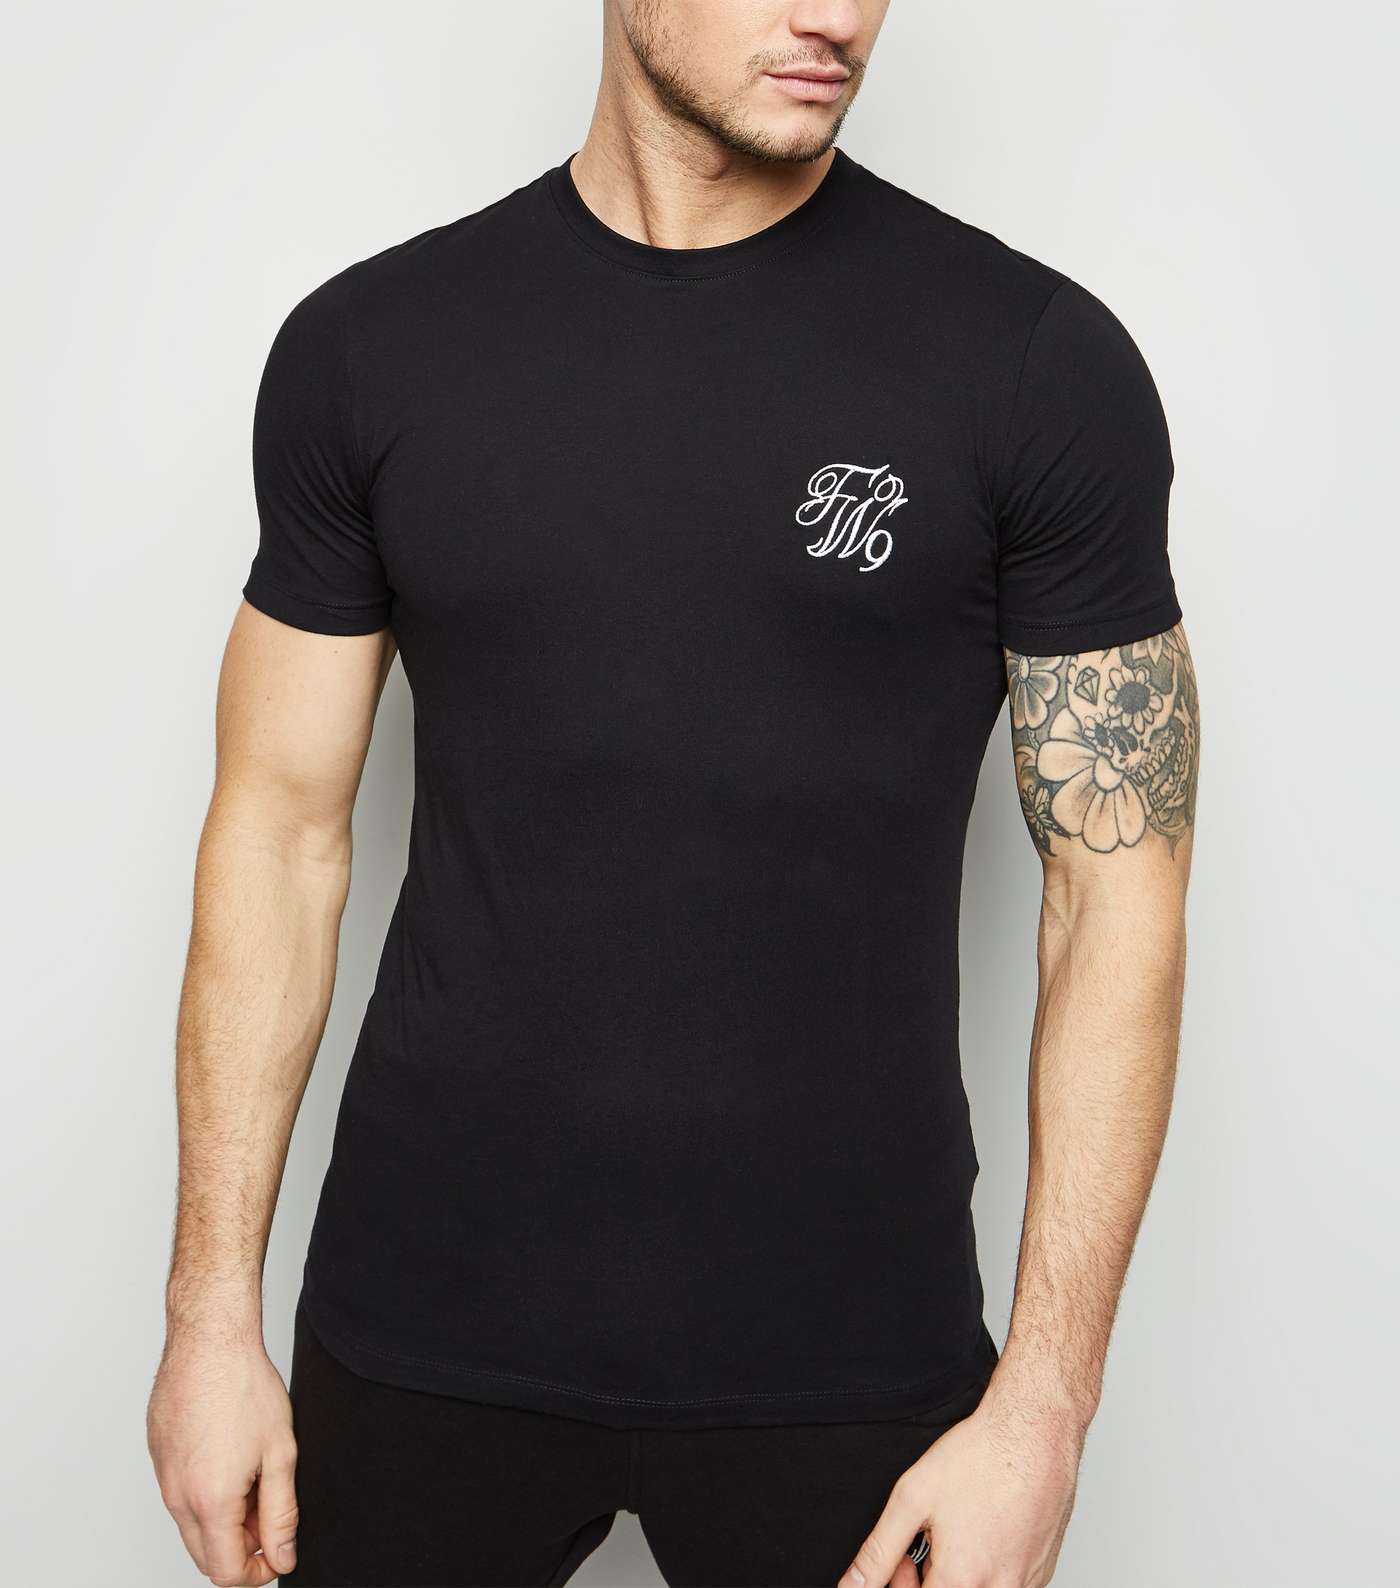 Black TW9 Embroidered Muscle Fit T-Shirt